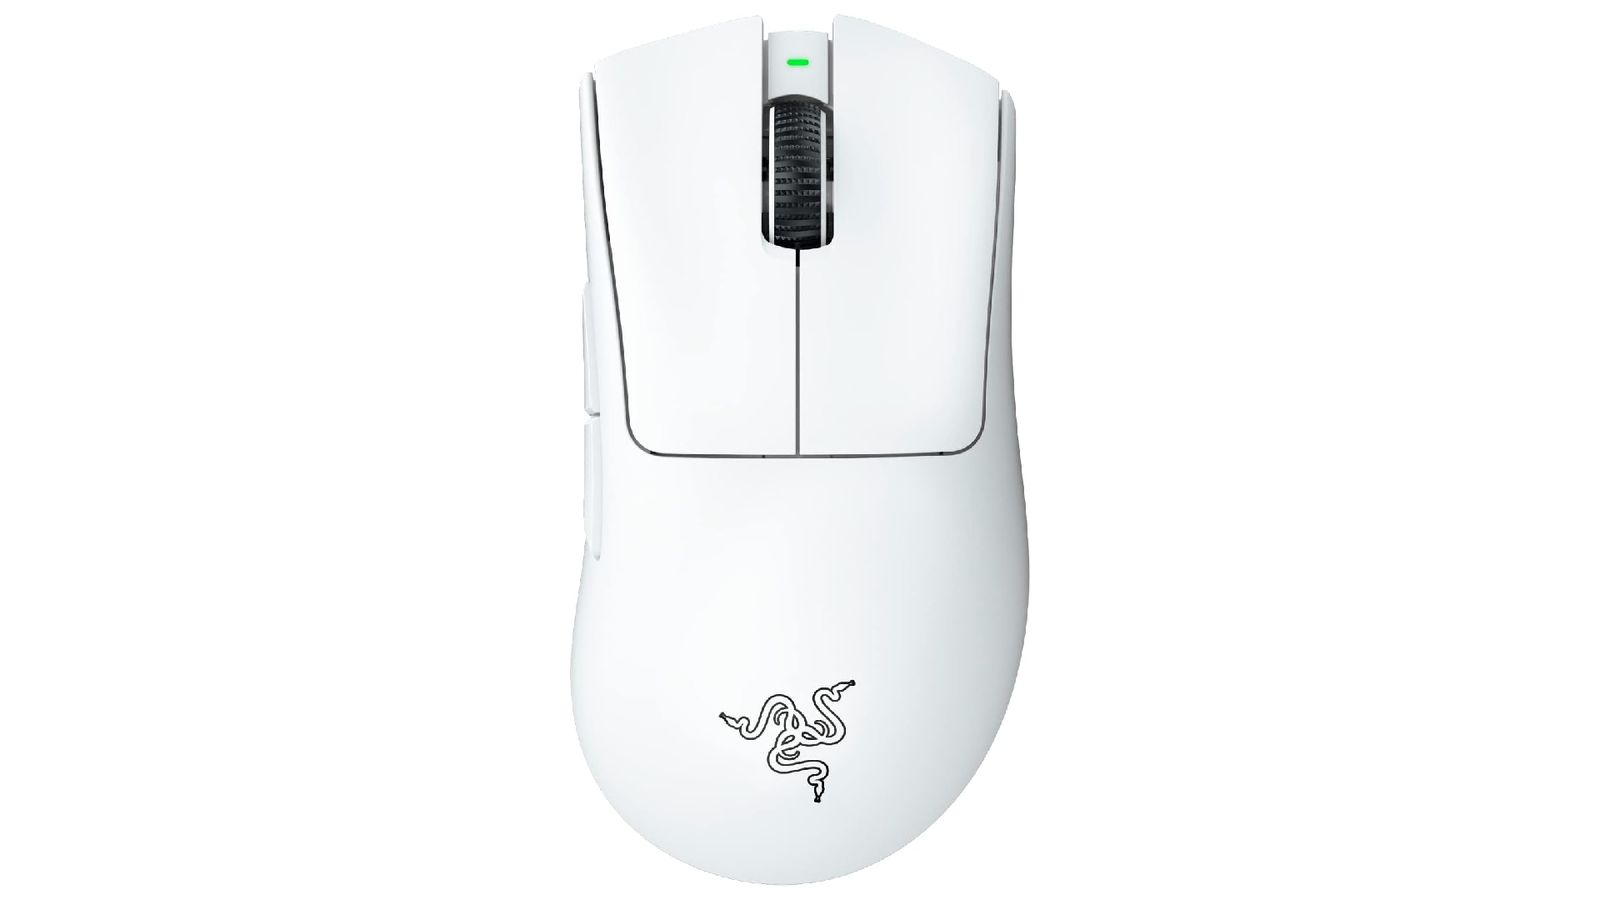 Razer DeathAdder V3 Pro product image of a white wireless mouse featuring the Razer logo in black at the bottom.